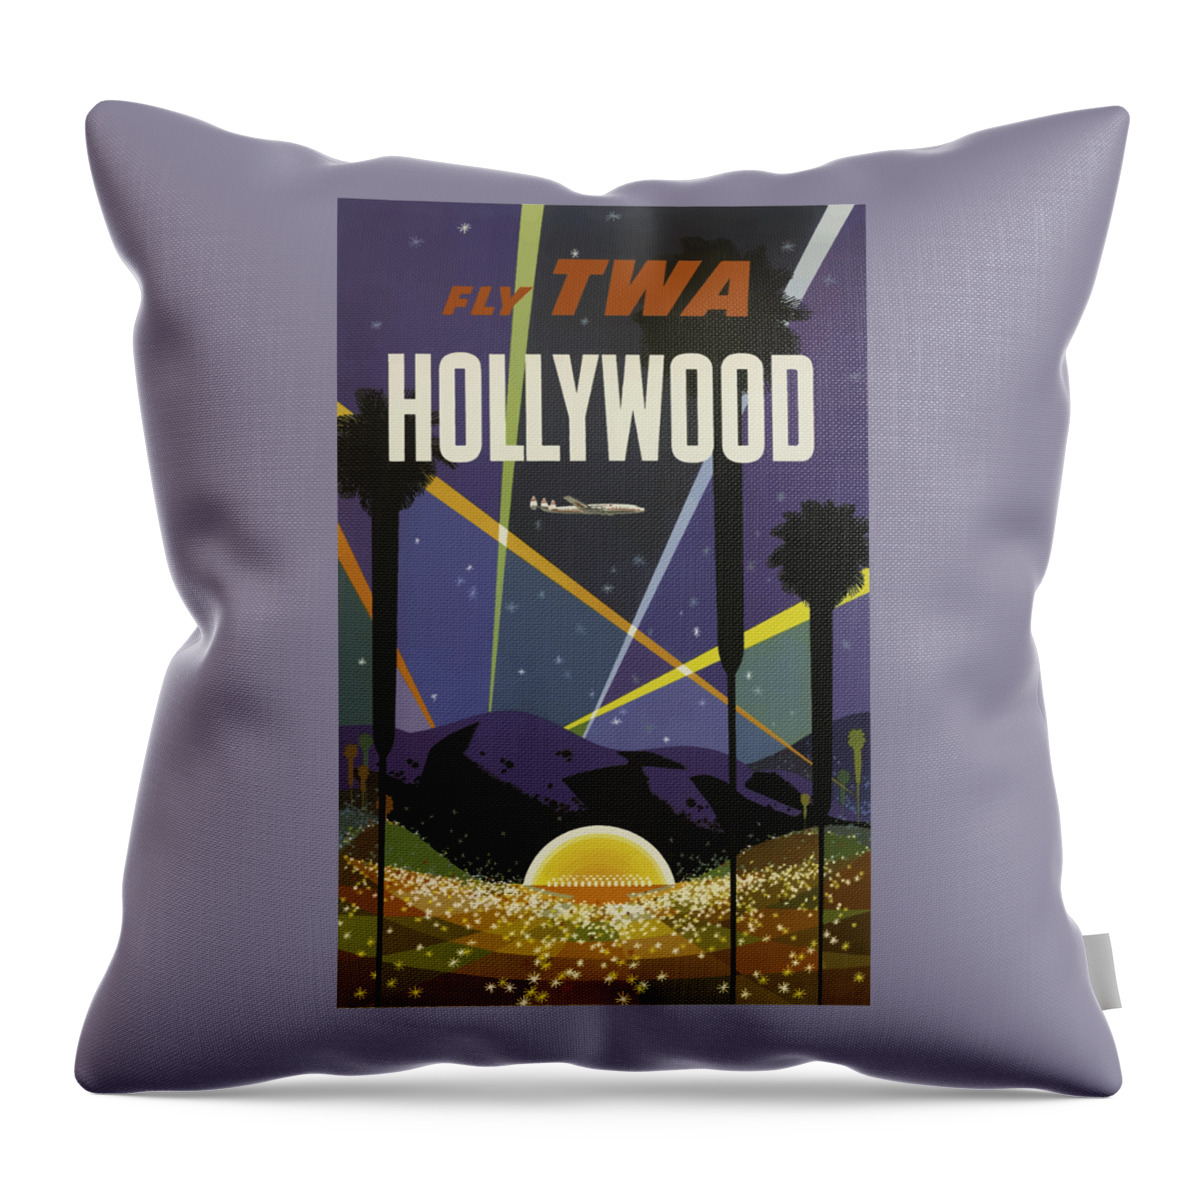 Hollywood Throw Pillow featuring the painting Vintage Travel Poster - Hollywood by Esoterica Art Agency